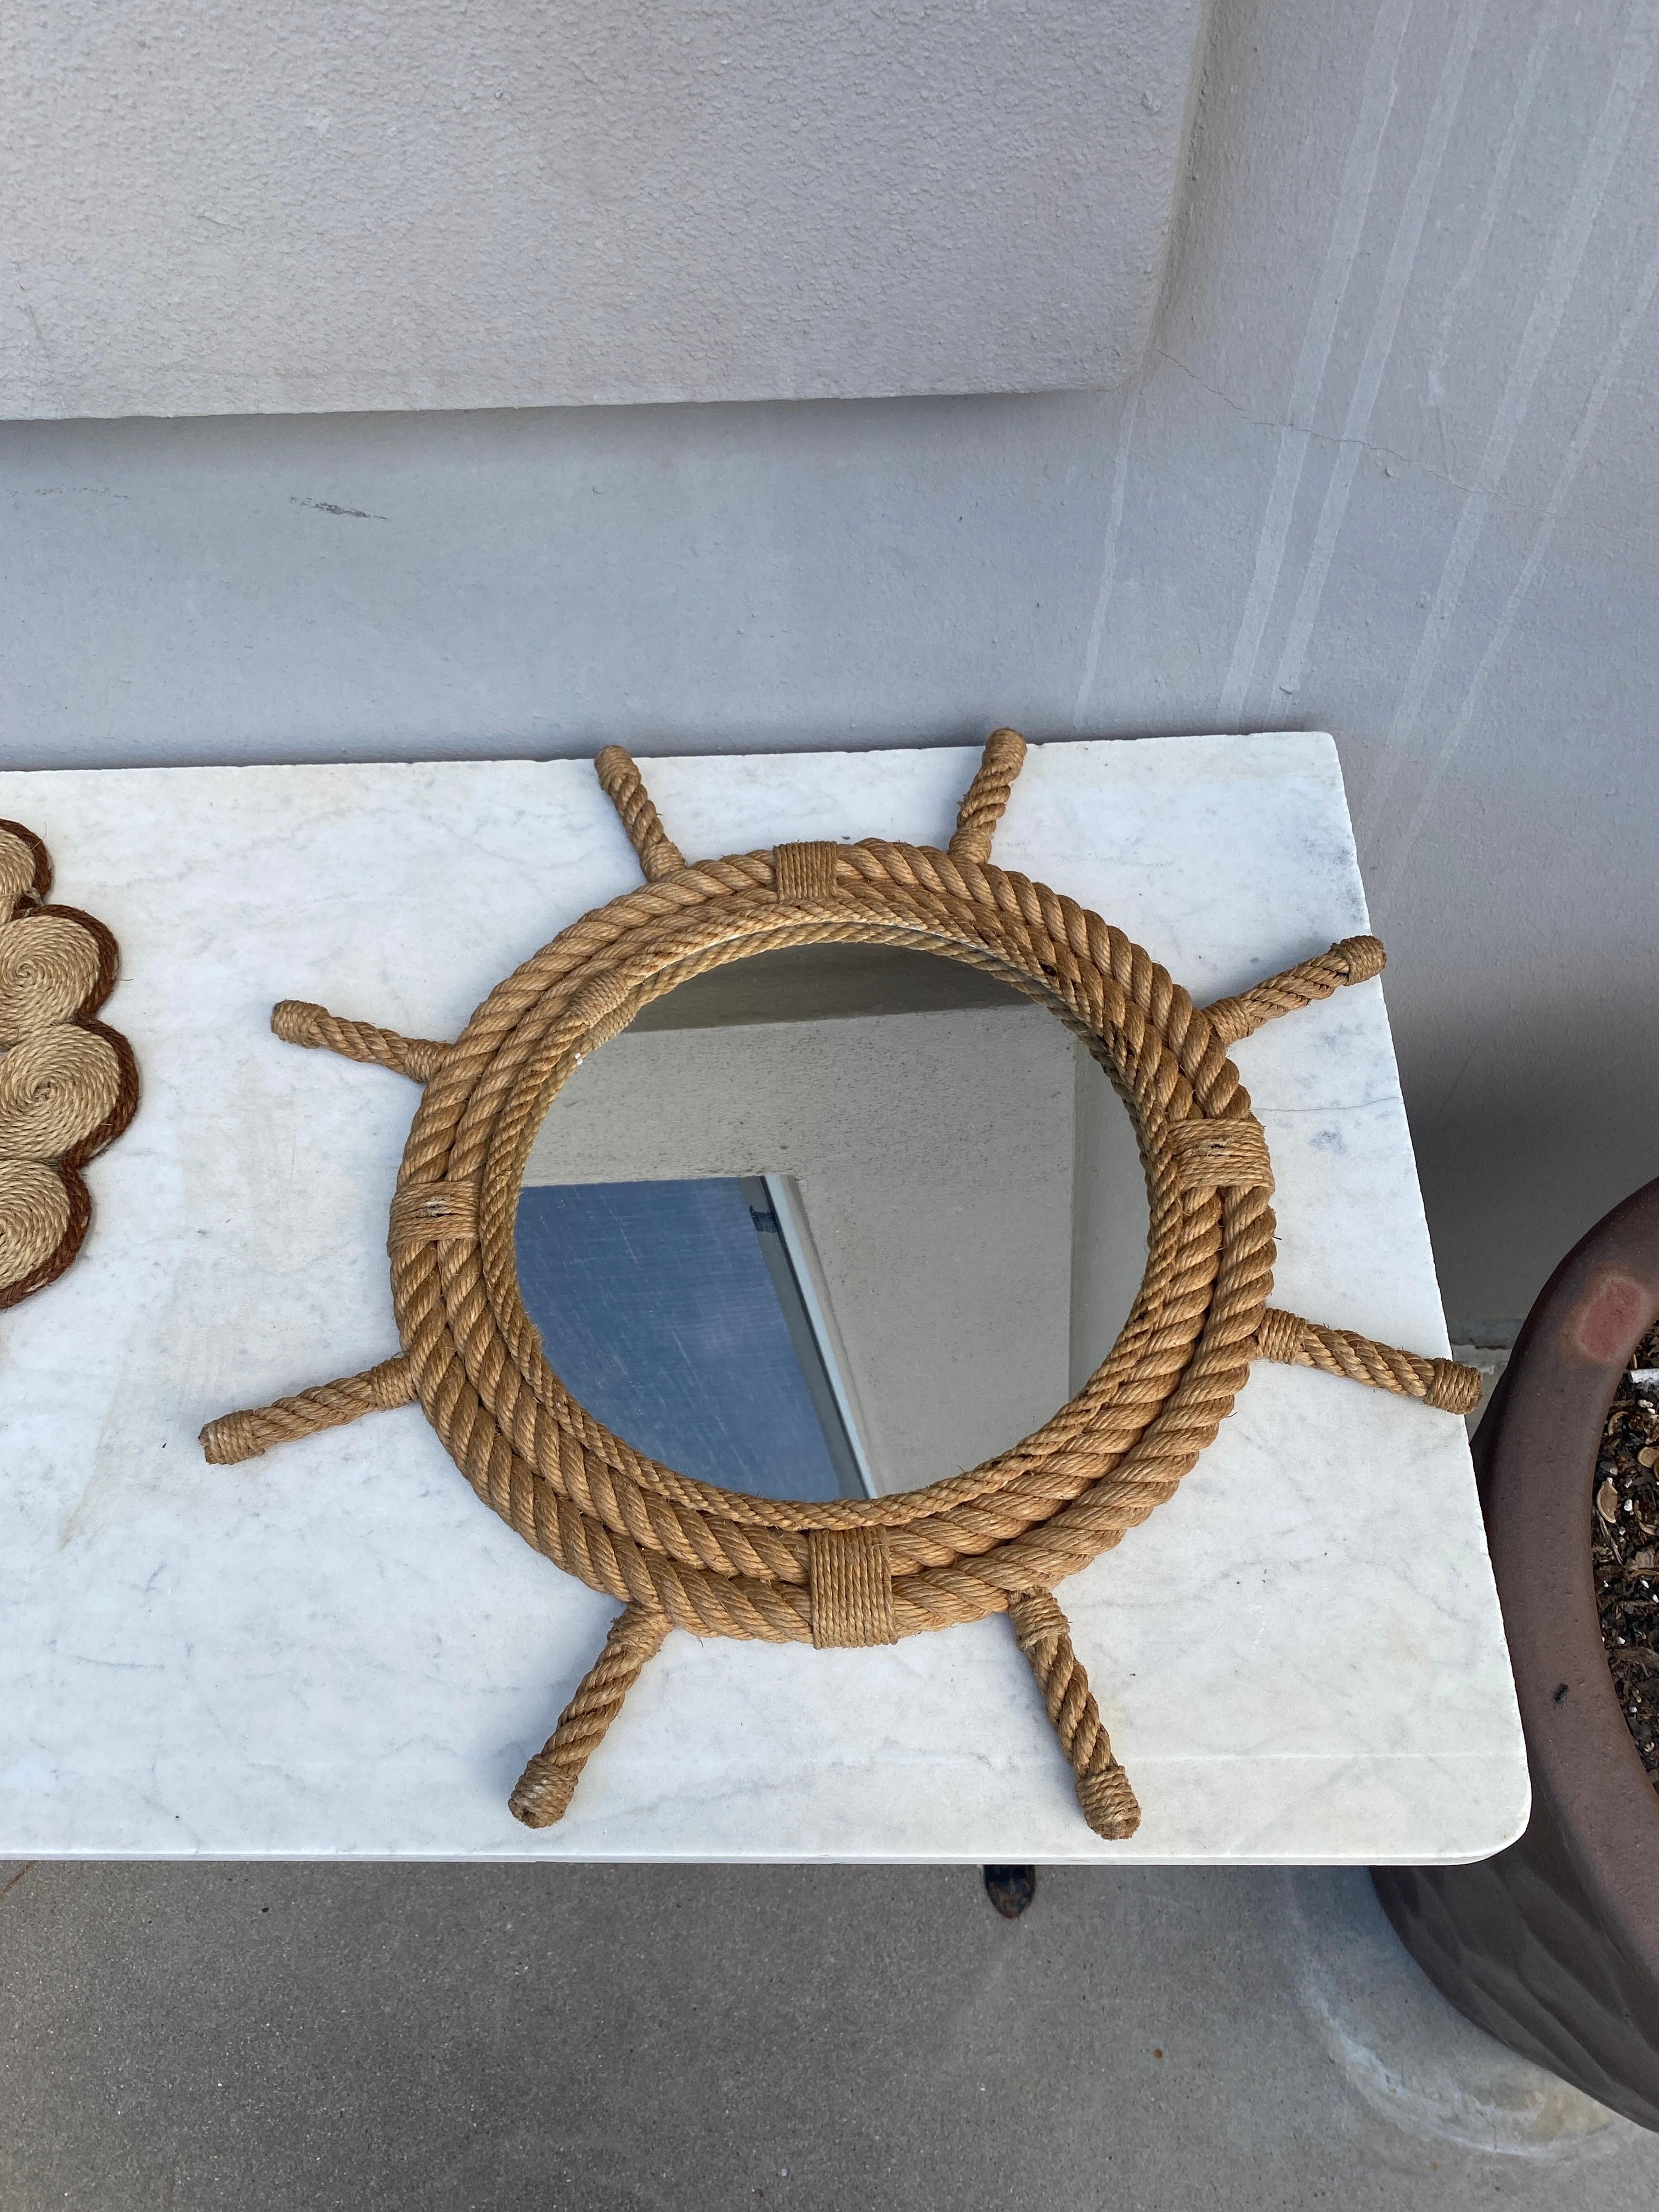 French round nautical rope mirror in a wheel shape Audoux Minet, circa 1960.
Size: 18.5 inches diameter.